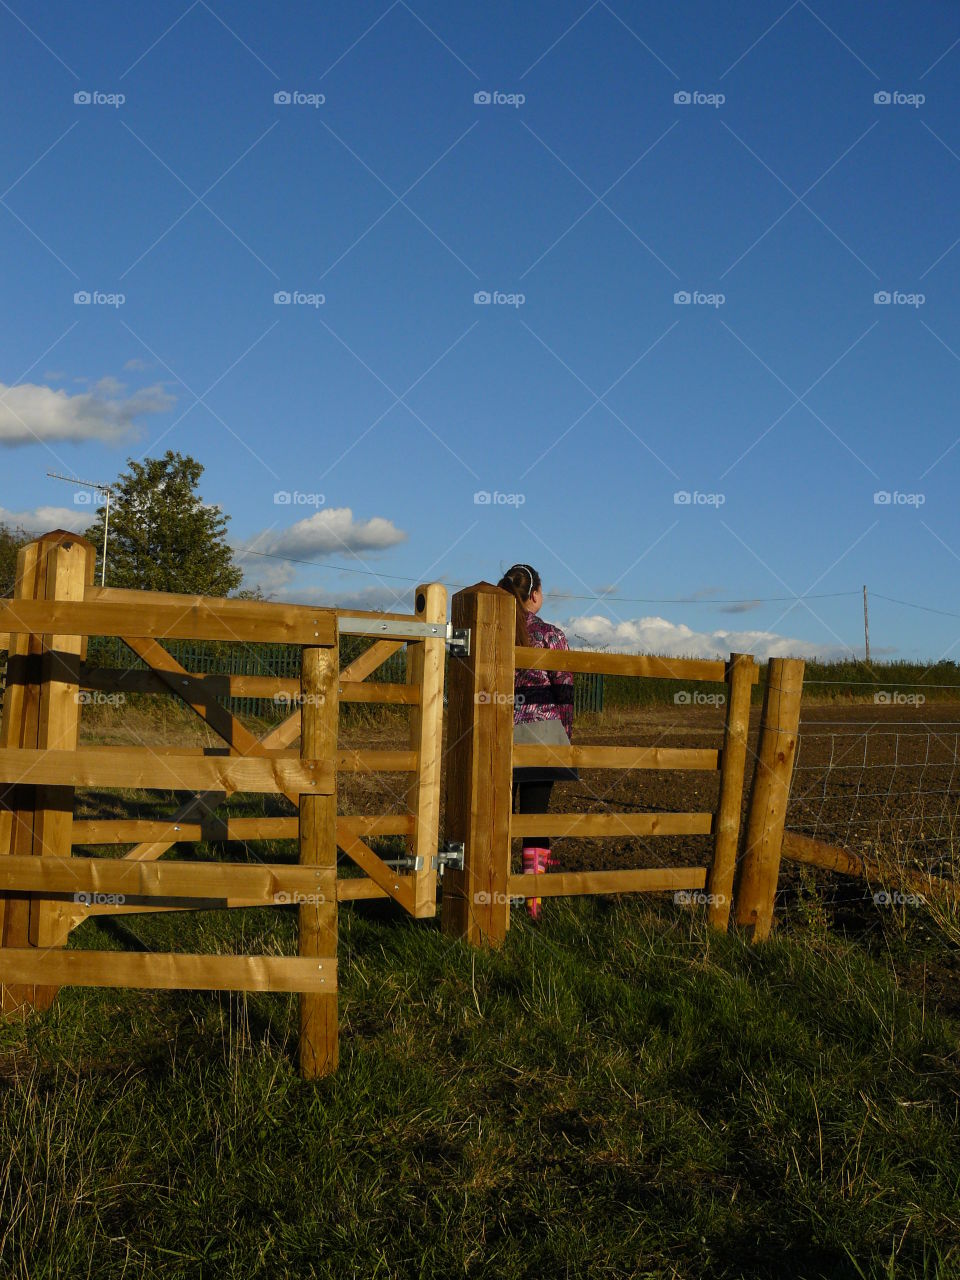 Wooden Fence And Gate On A Public Footpath Through A Farmers Field - Blue Sky With Clouds - Girl Looking Into The Distance